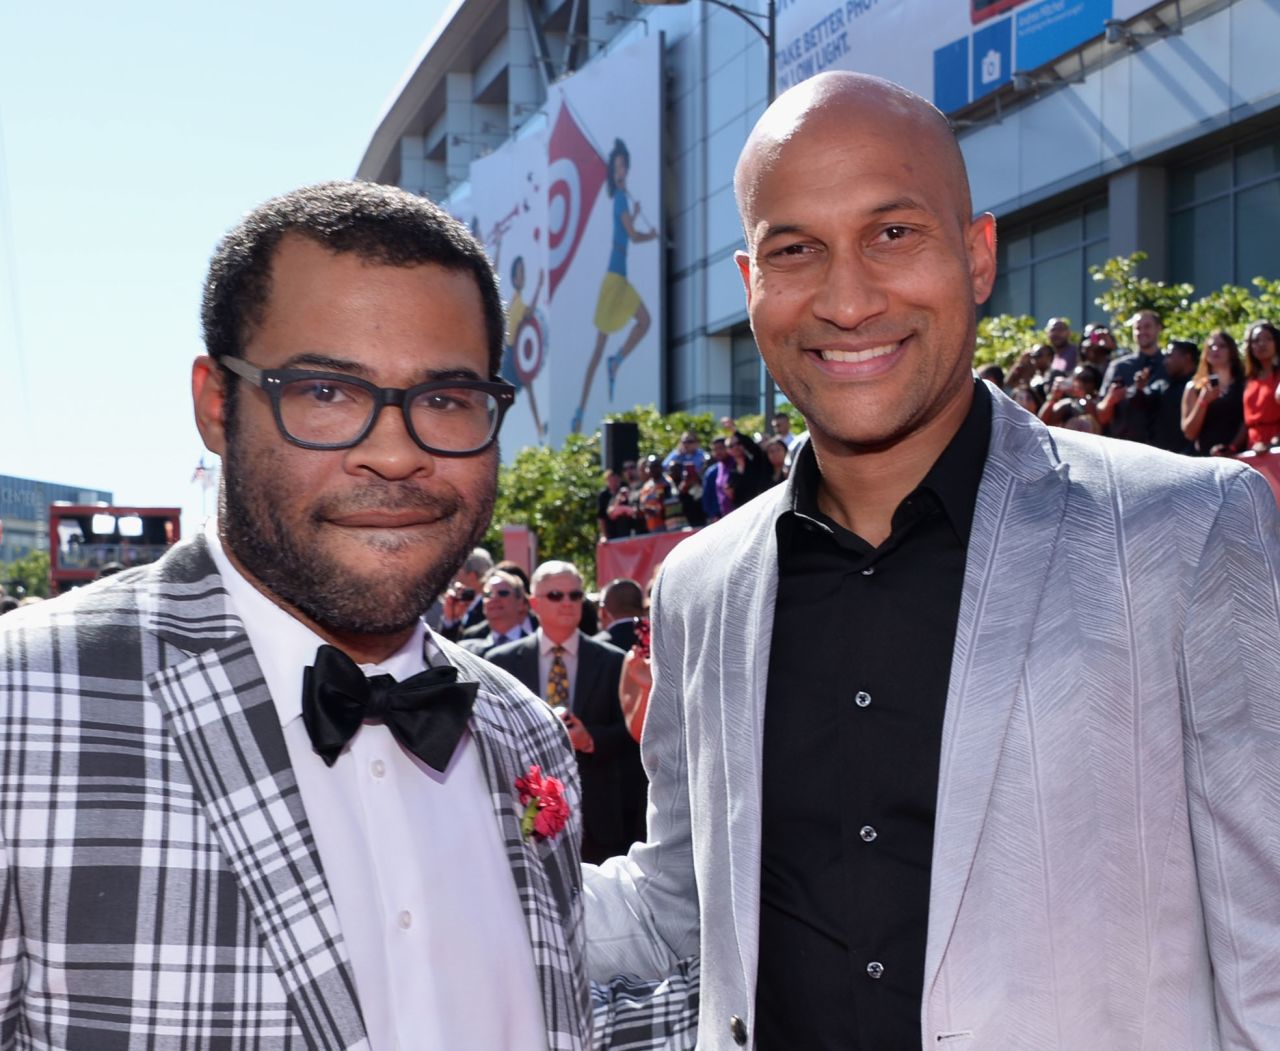 Comedians Jordan Peele, left, and Keegan-Michael Key have a popular Comedy Central show, which often pokes fun at mistaken identities. "Jordan and I have an African-American way of looking at things but also a child-of-a-white-mother way of looking at things," Key told USA Today in 2012. "We have a very different and distinct filter that we see the world through that other people don't, because we're hybrids."